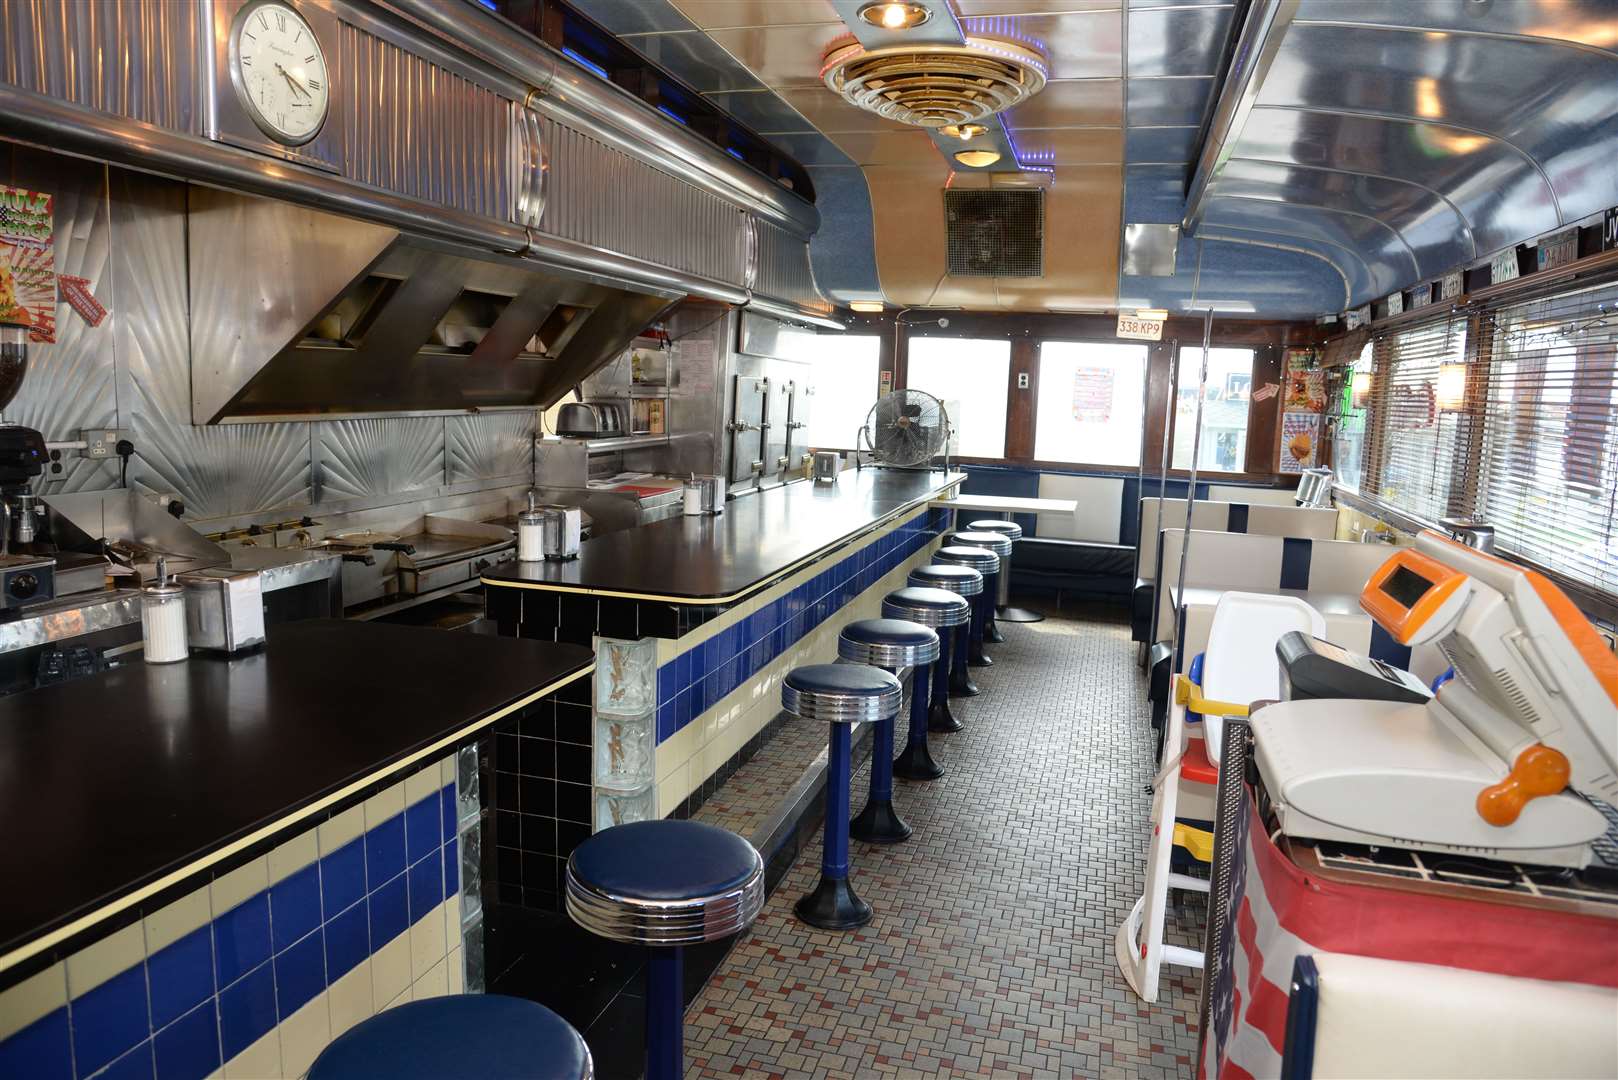 The original diner had all the original fittings and decor